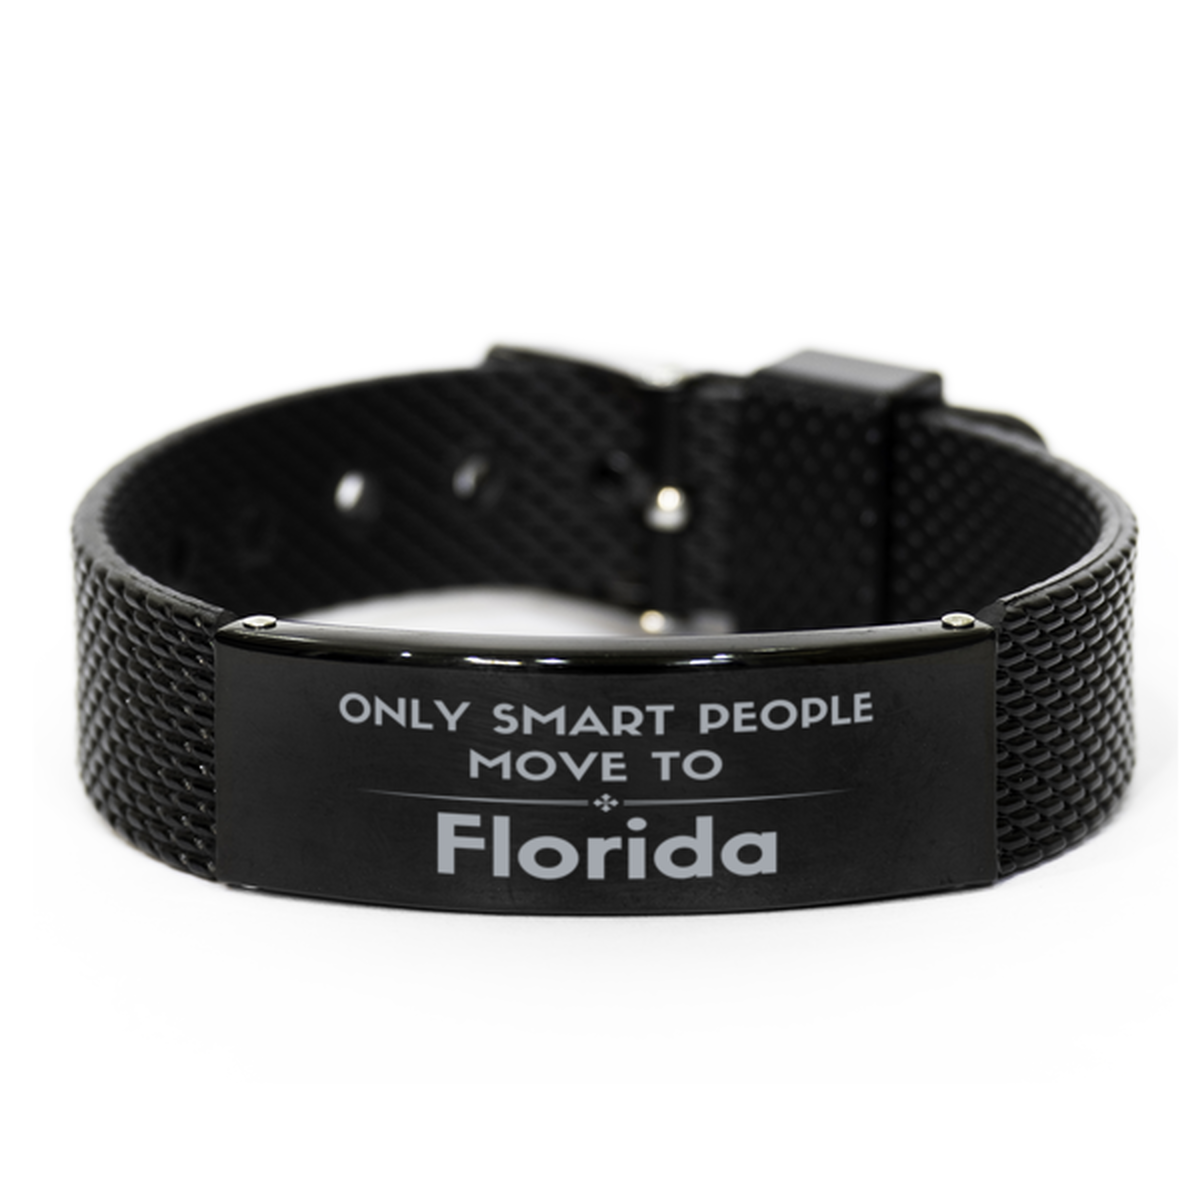 Only smart people move to Florida Black Shark Mesh Bracelet, Gag Gifts For Florida, Move to Florida Gifts for Friends Coworker Funny Saying Quote